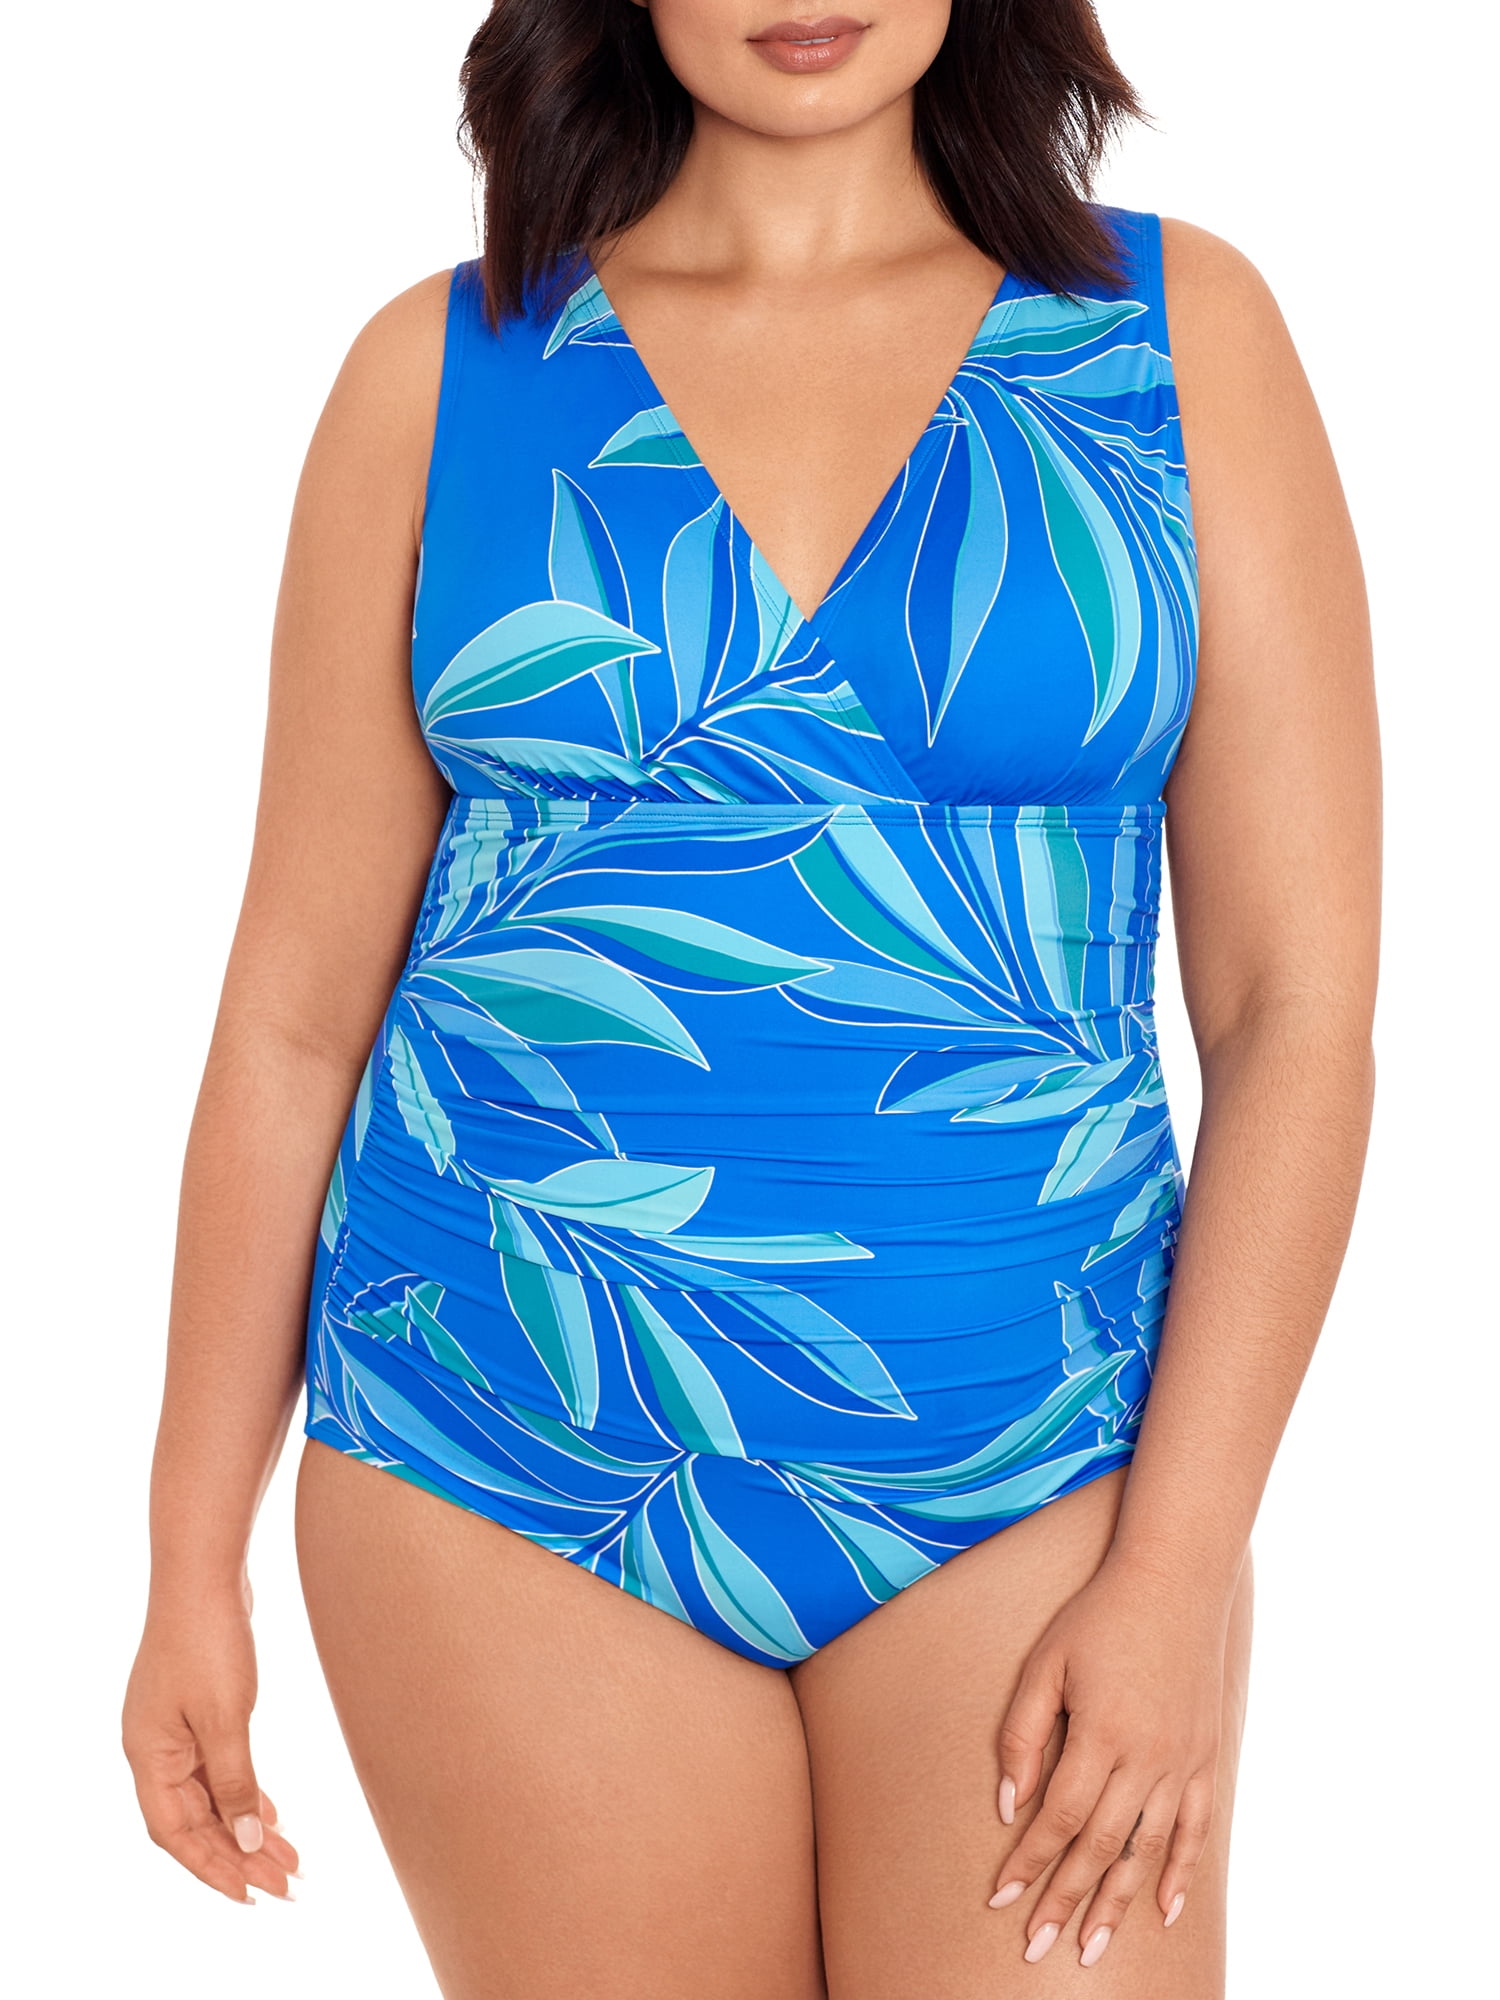 Embrace Your Curves™ by Miracle Brands® Women's and Plus Vanessa V-Neck One  Piece Swimsuit 